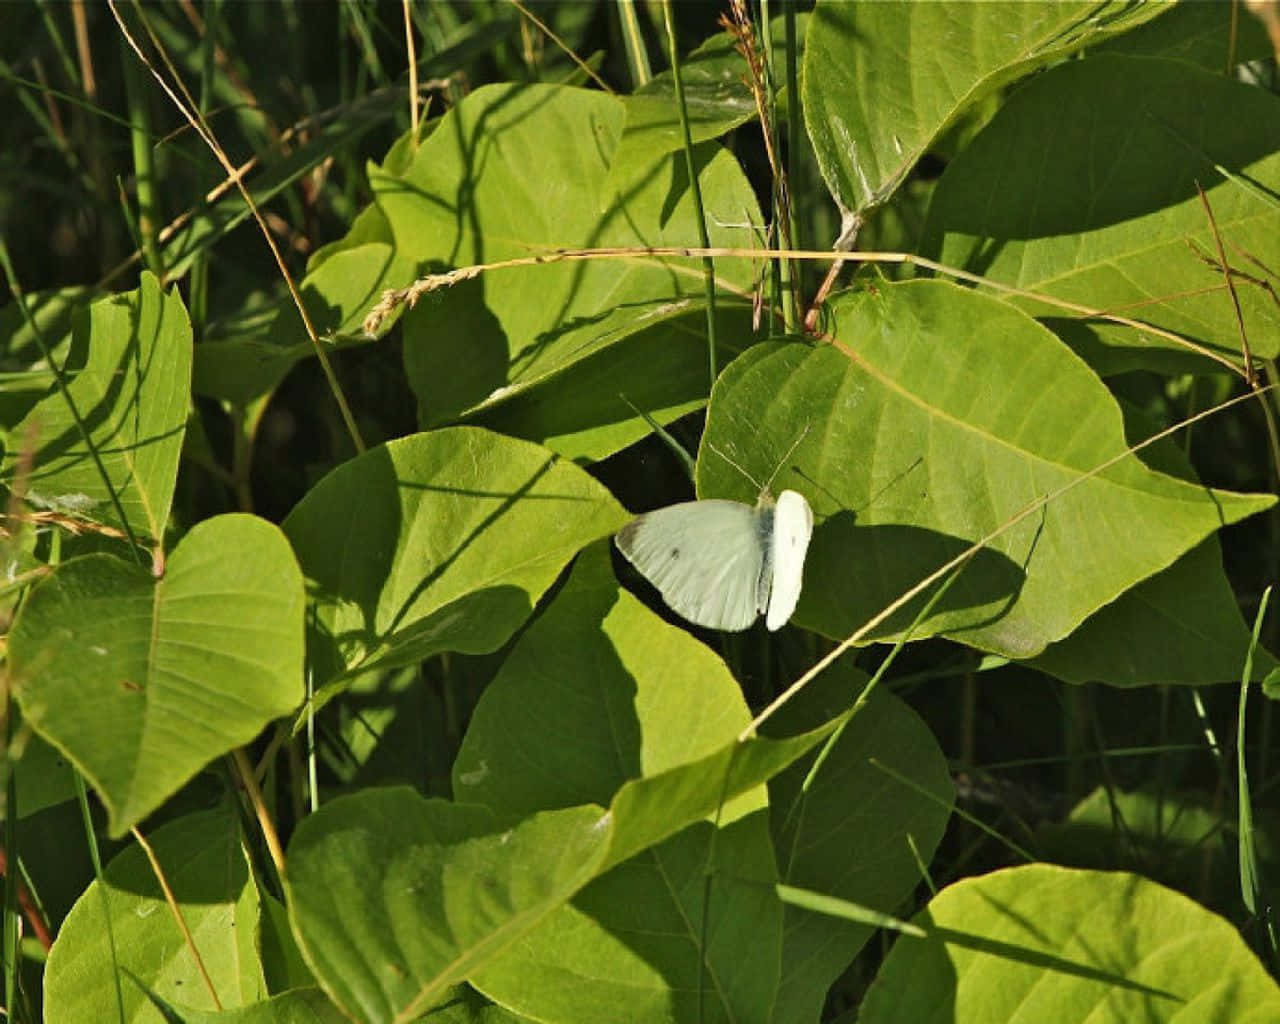 A White Butterfly Is Sitting On Some Green Leaves